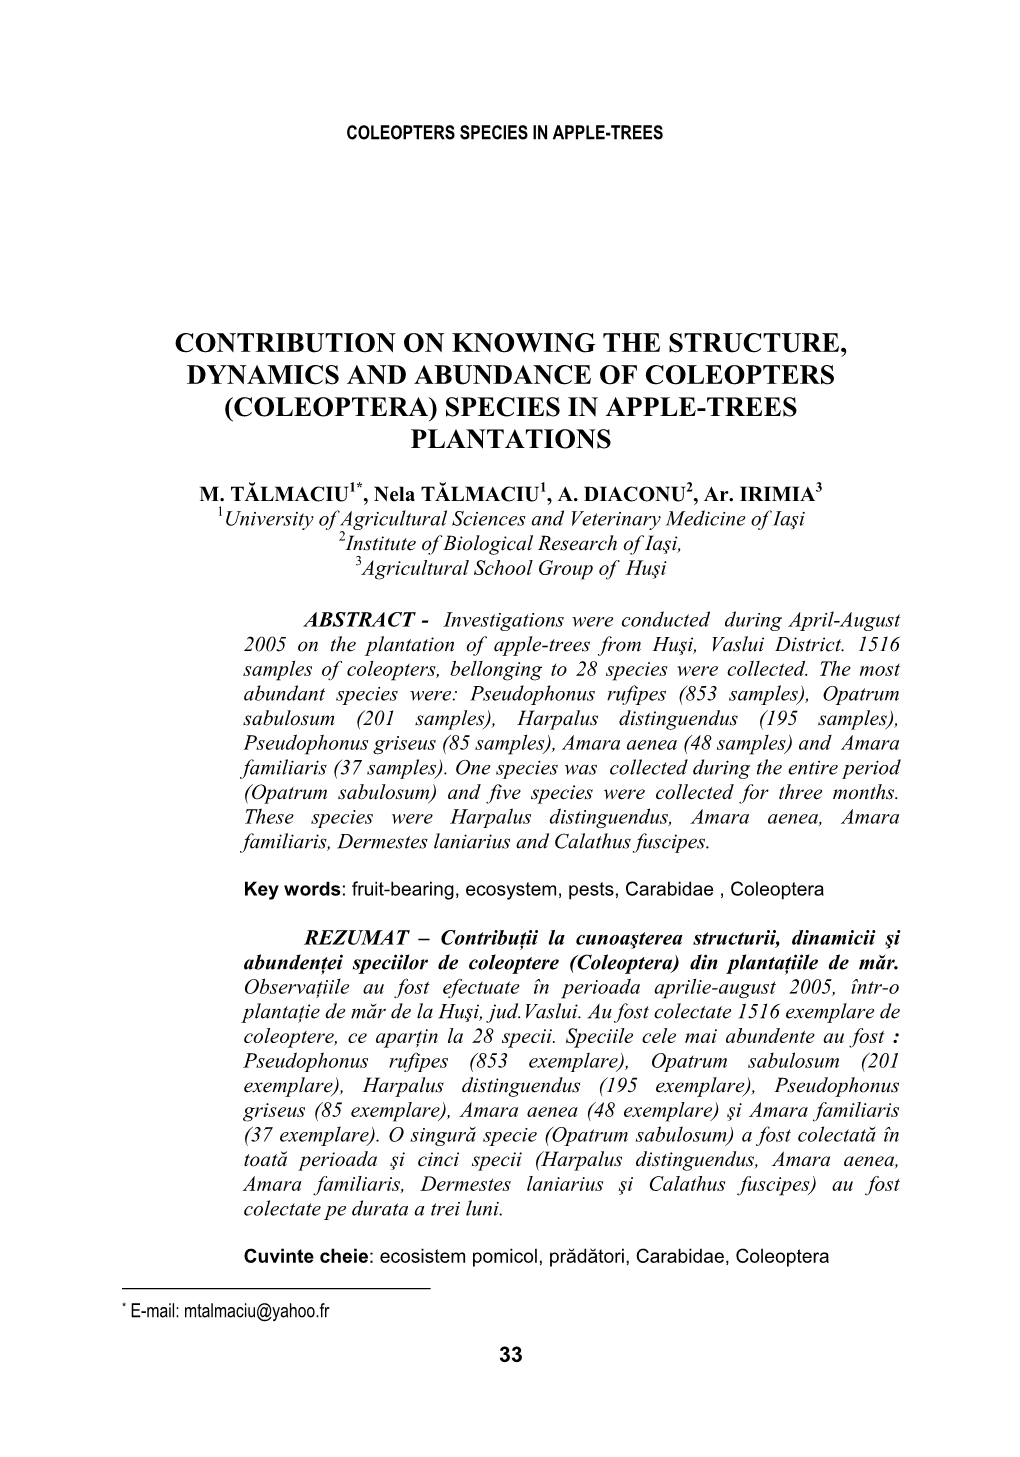 Contribution on Knowing the Structure, Dynamics and Abundance of Coleopters (Coleoptera) Species in Apple-Trees Plantations